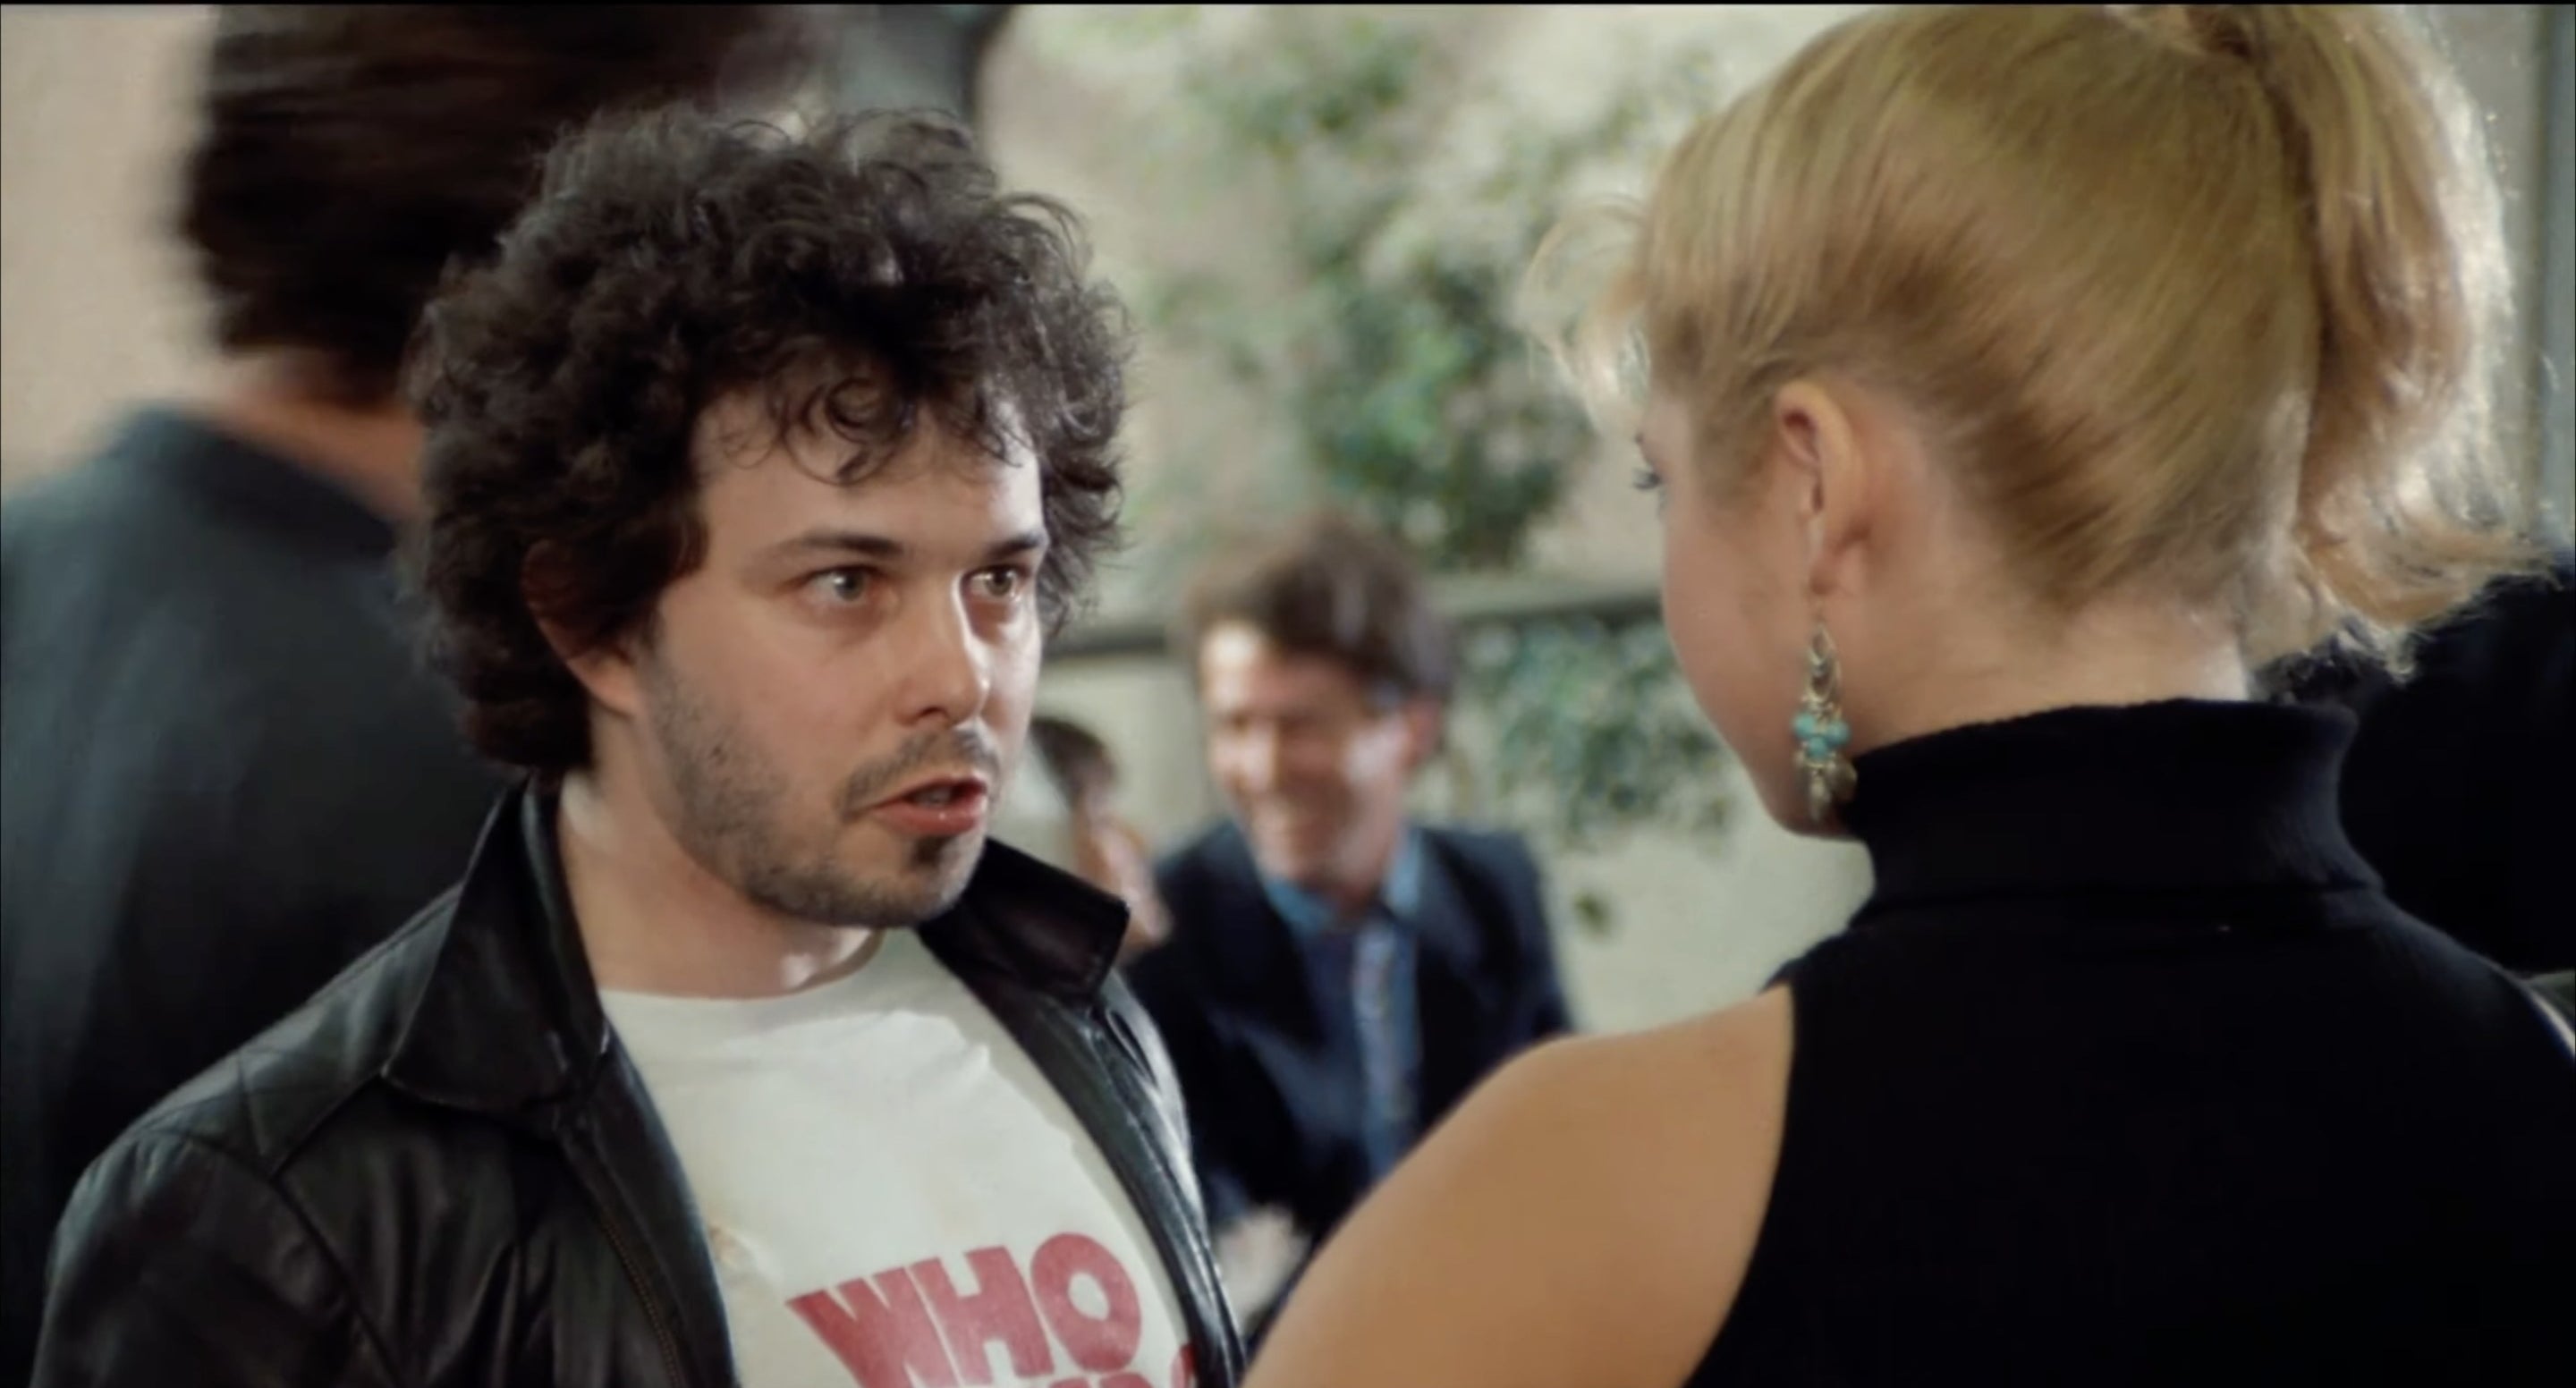 Man staring at woman in &quot;Revenge of the Nerds II&quot;